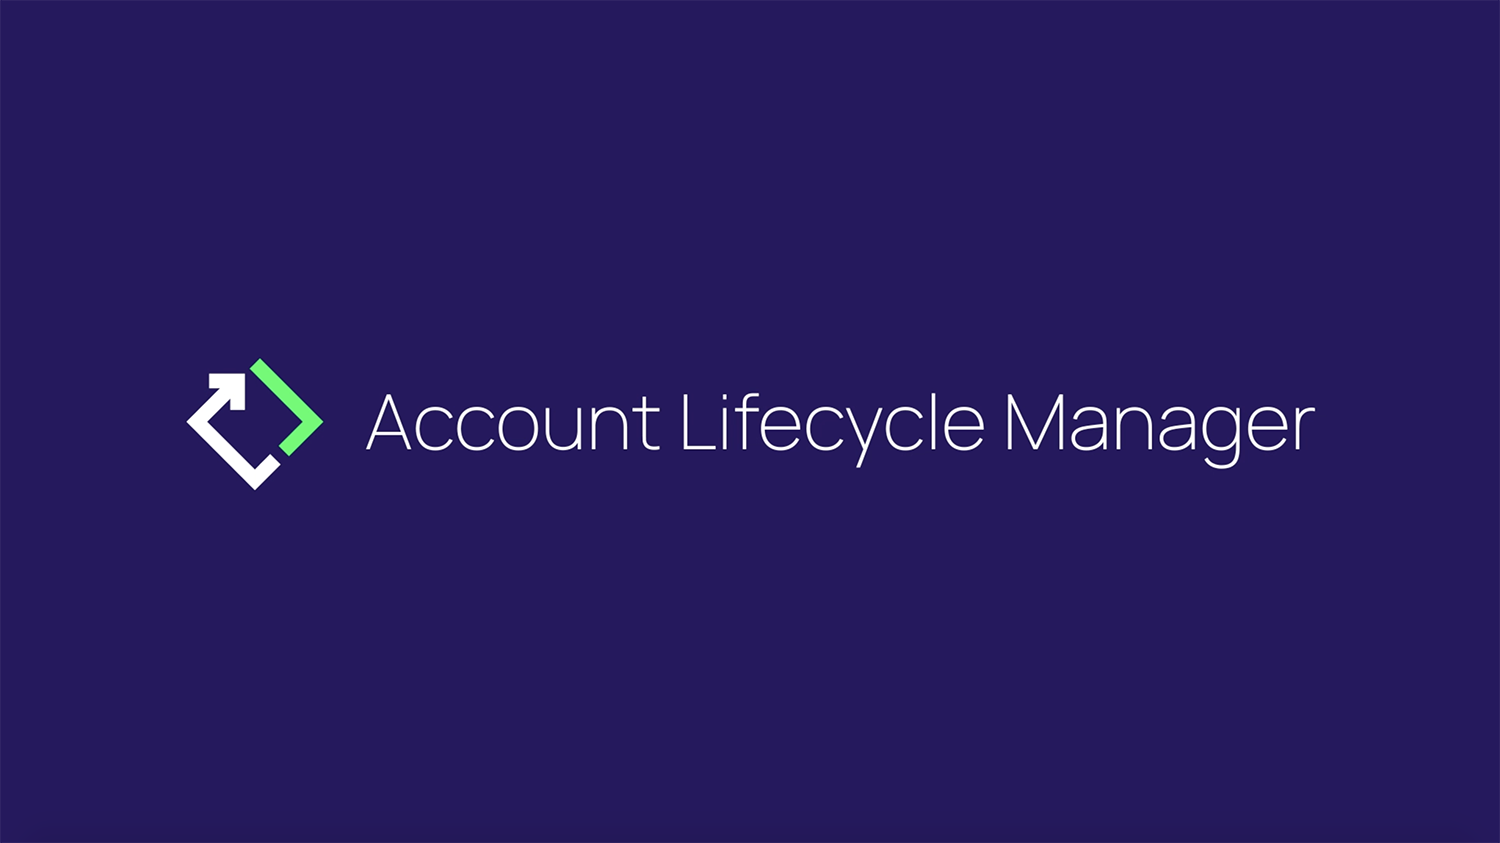 Account Lifecycle Manager Demo